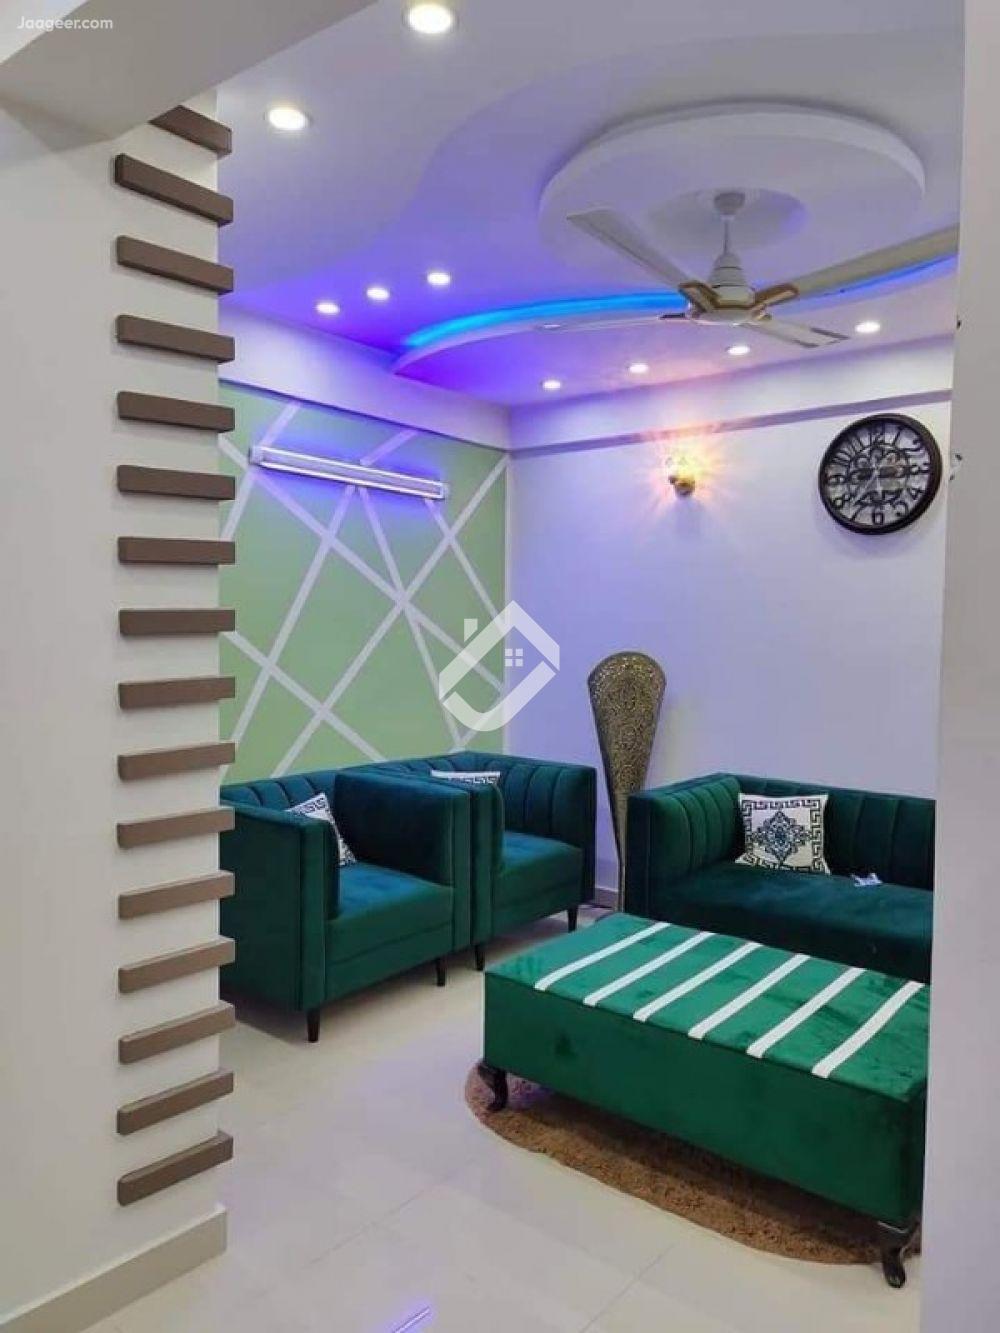 View  2 Bed Flat For Sale In Gulberg Greens  in Gulberg Green, Islamabad